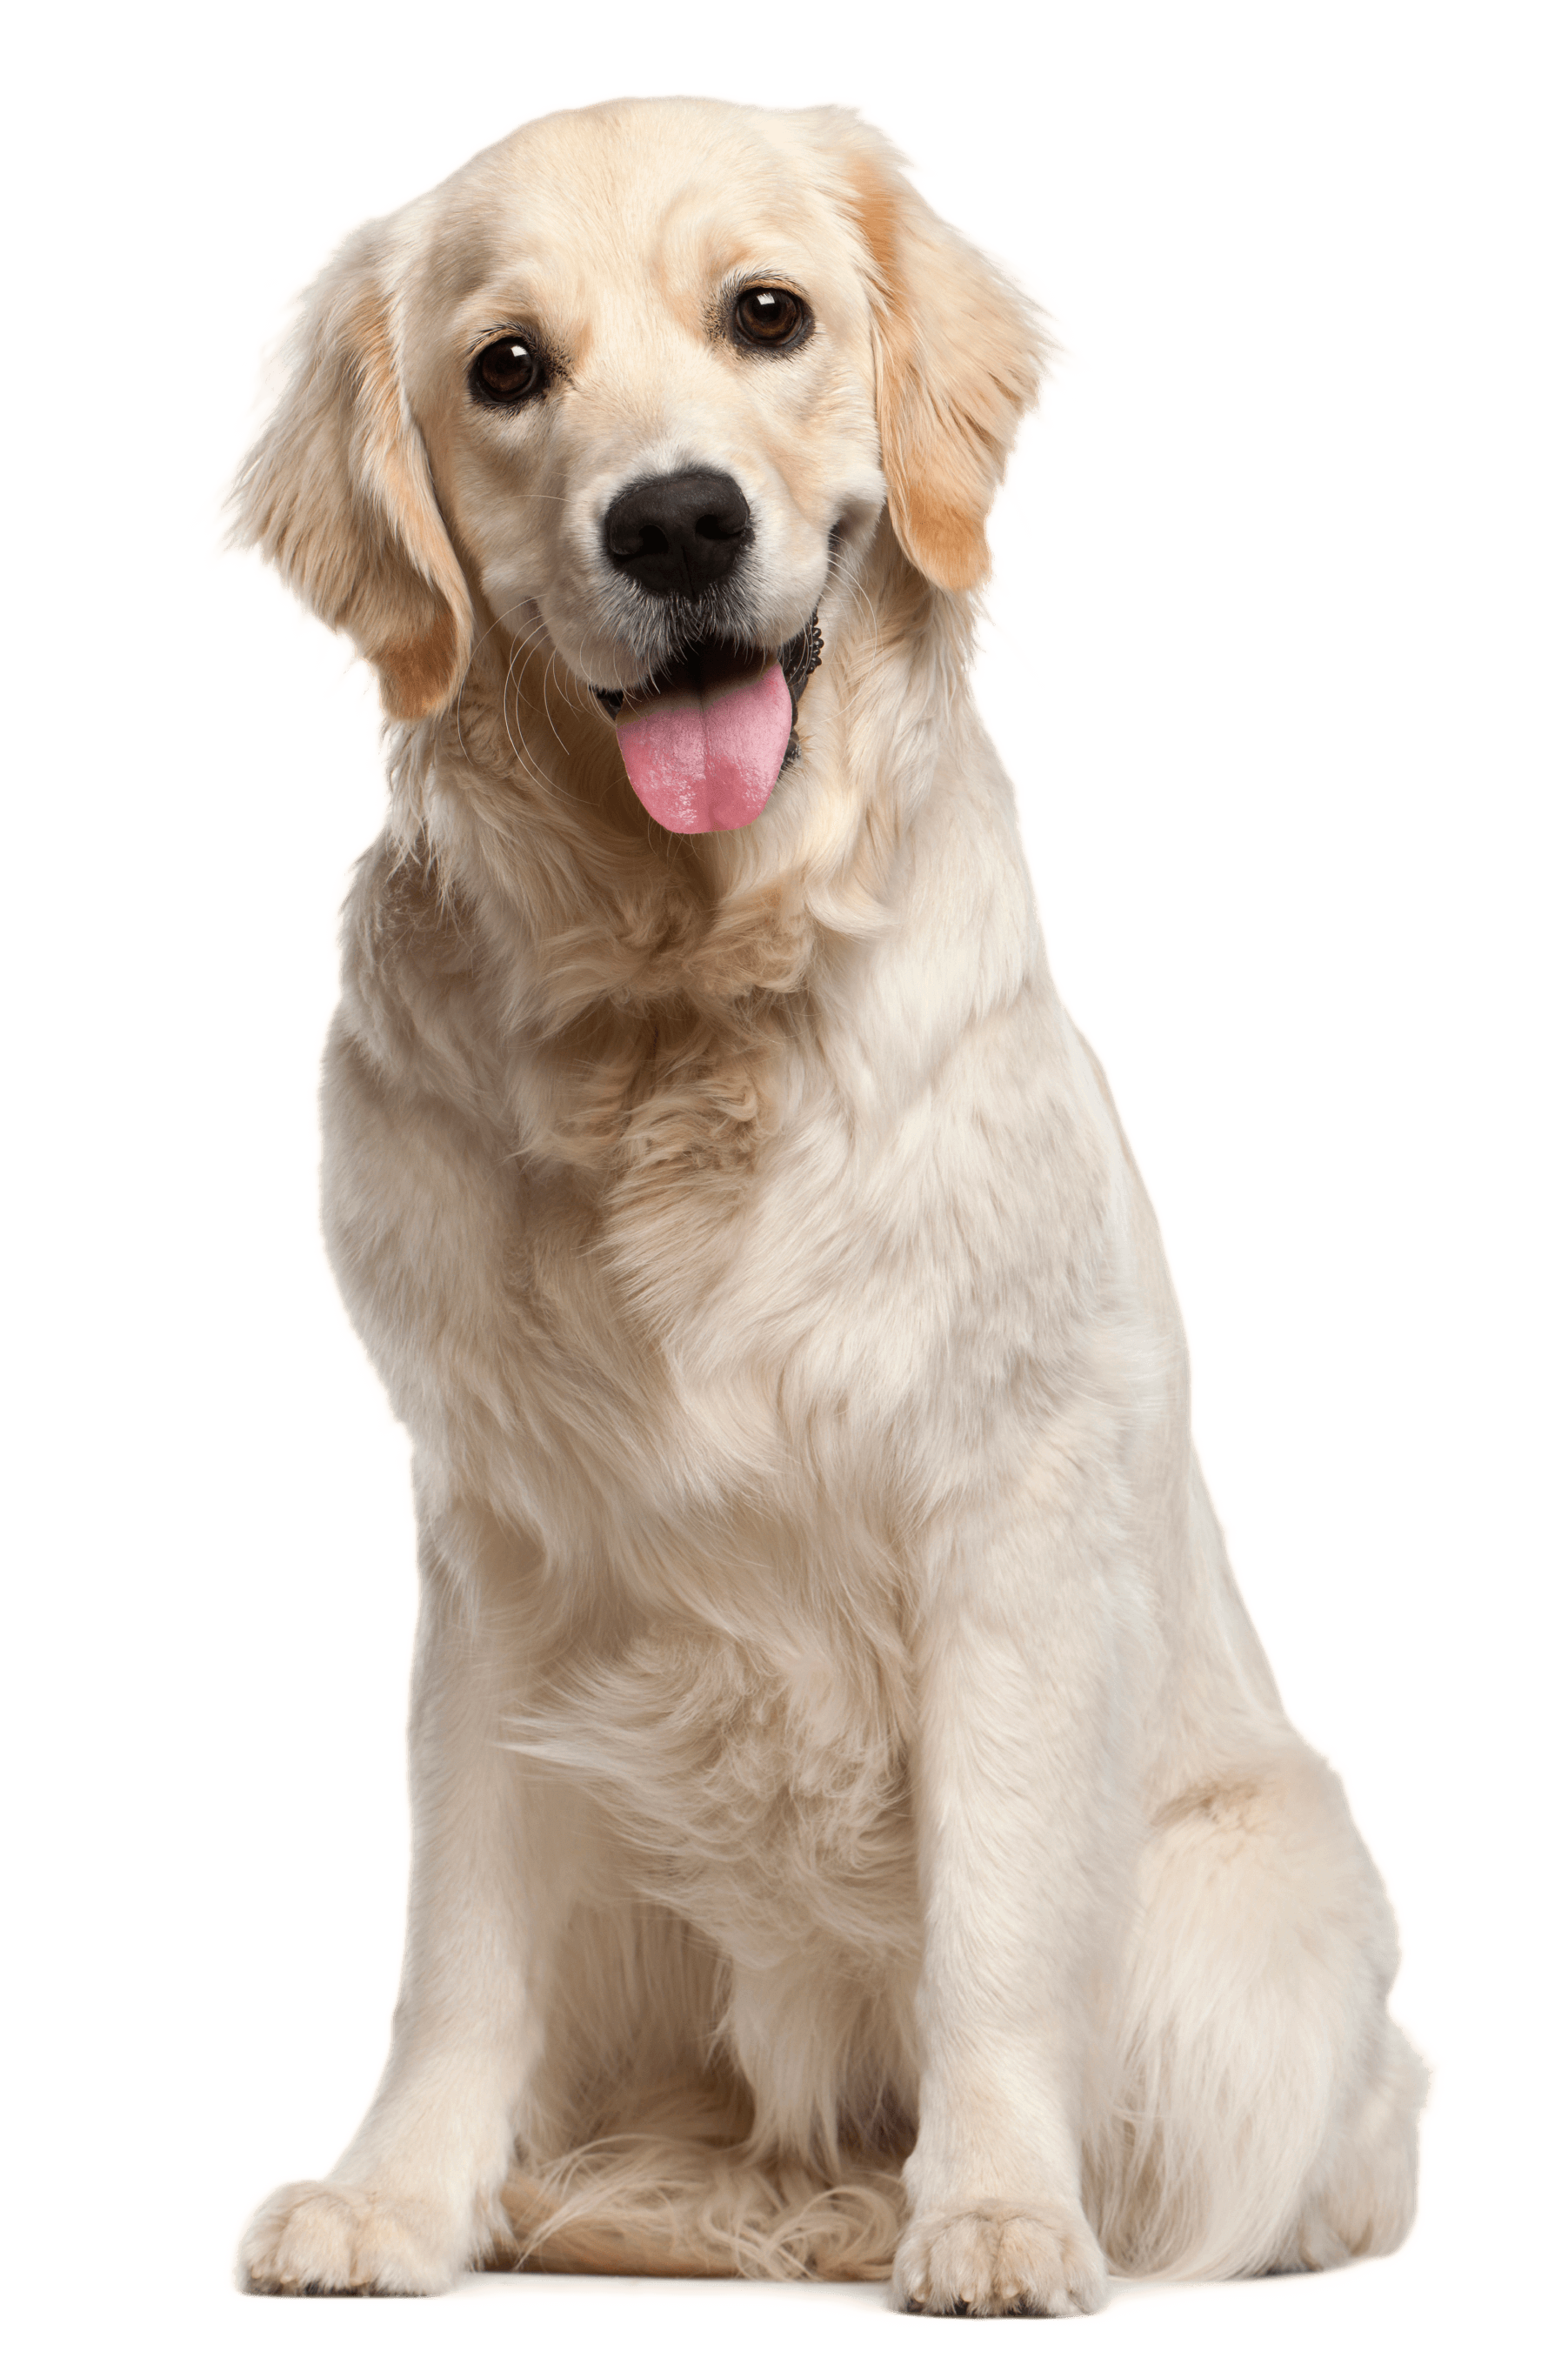 Dog png image, dogs, puppy pi